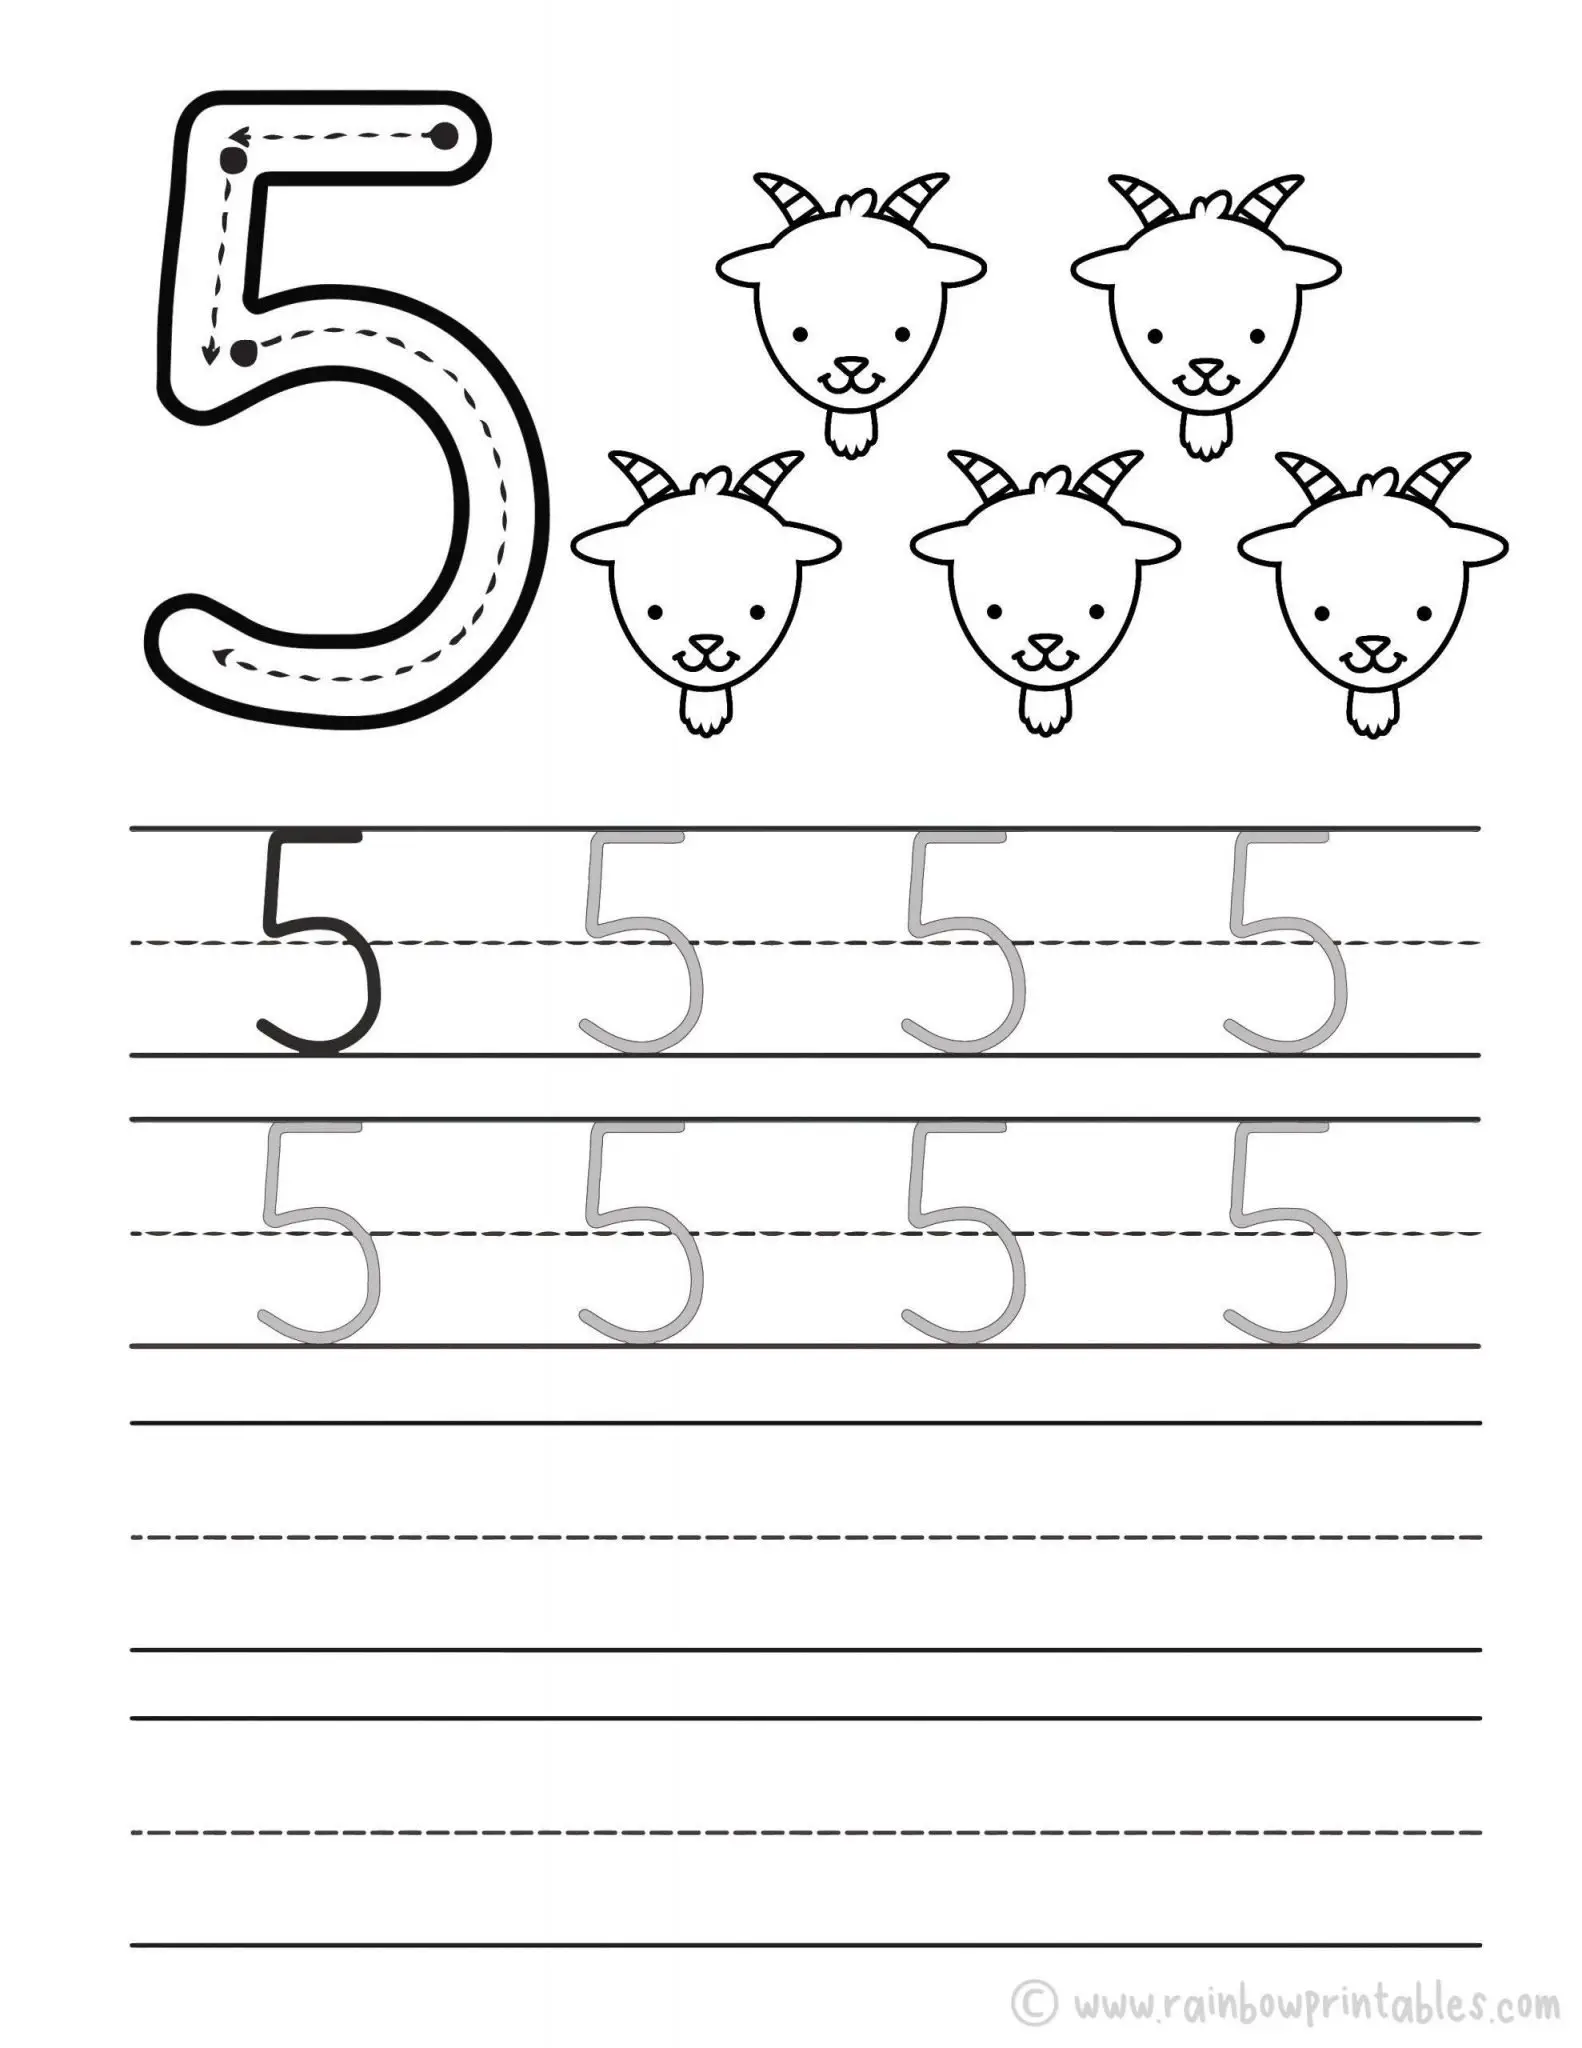 Free Math Printable: Numerical Practice Tracing Pages (#0 to #10 ...